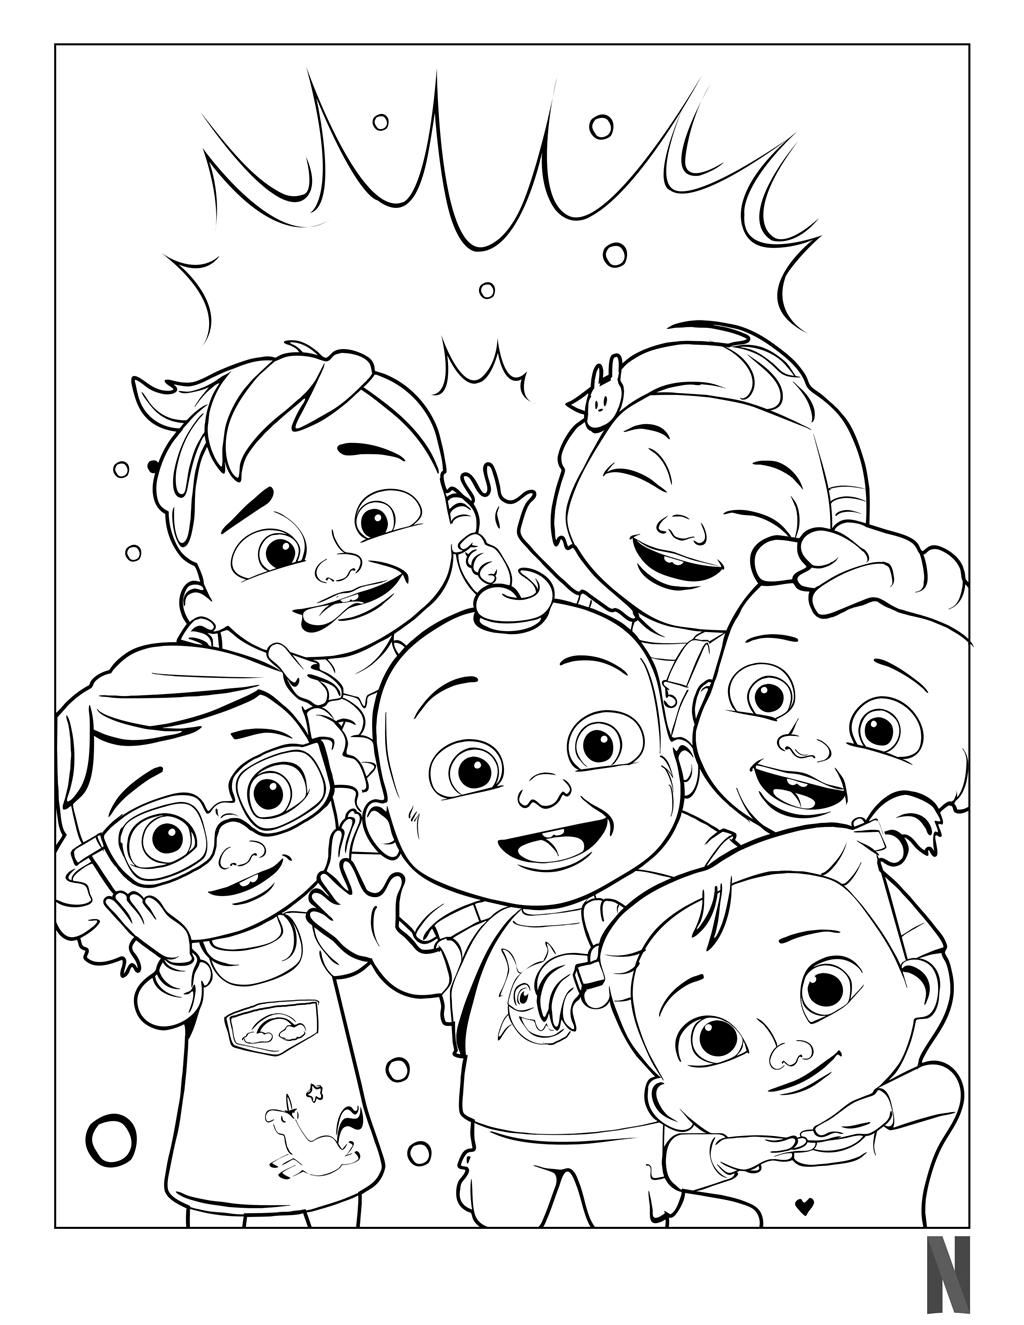 CoComelon Coloring Pages Characters. in 2021 | Birthday coloring pages, Coloring  pages, Cartoon coloring pages